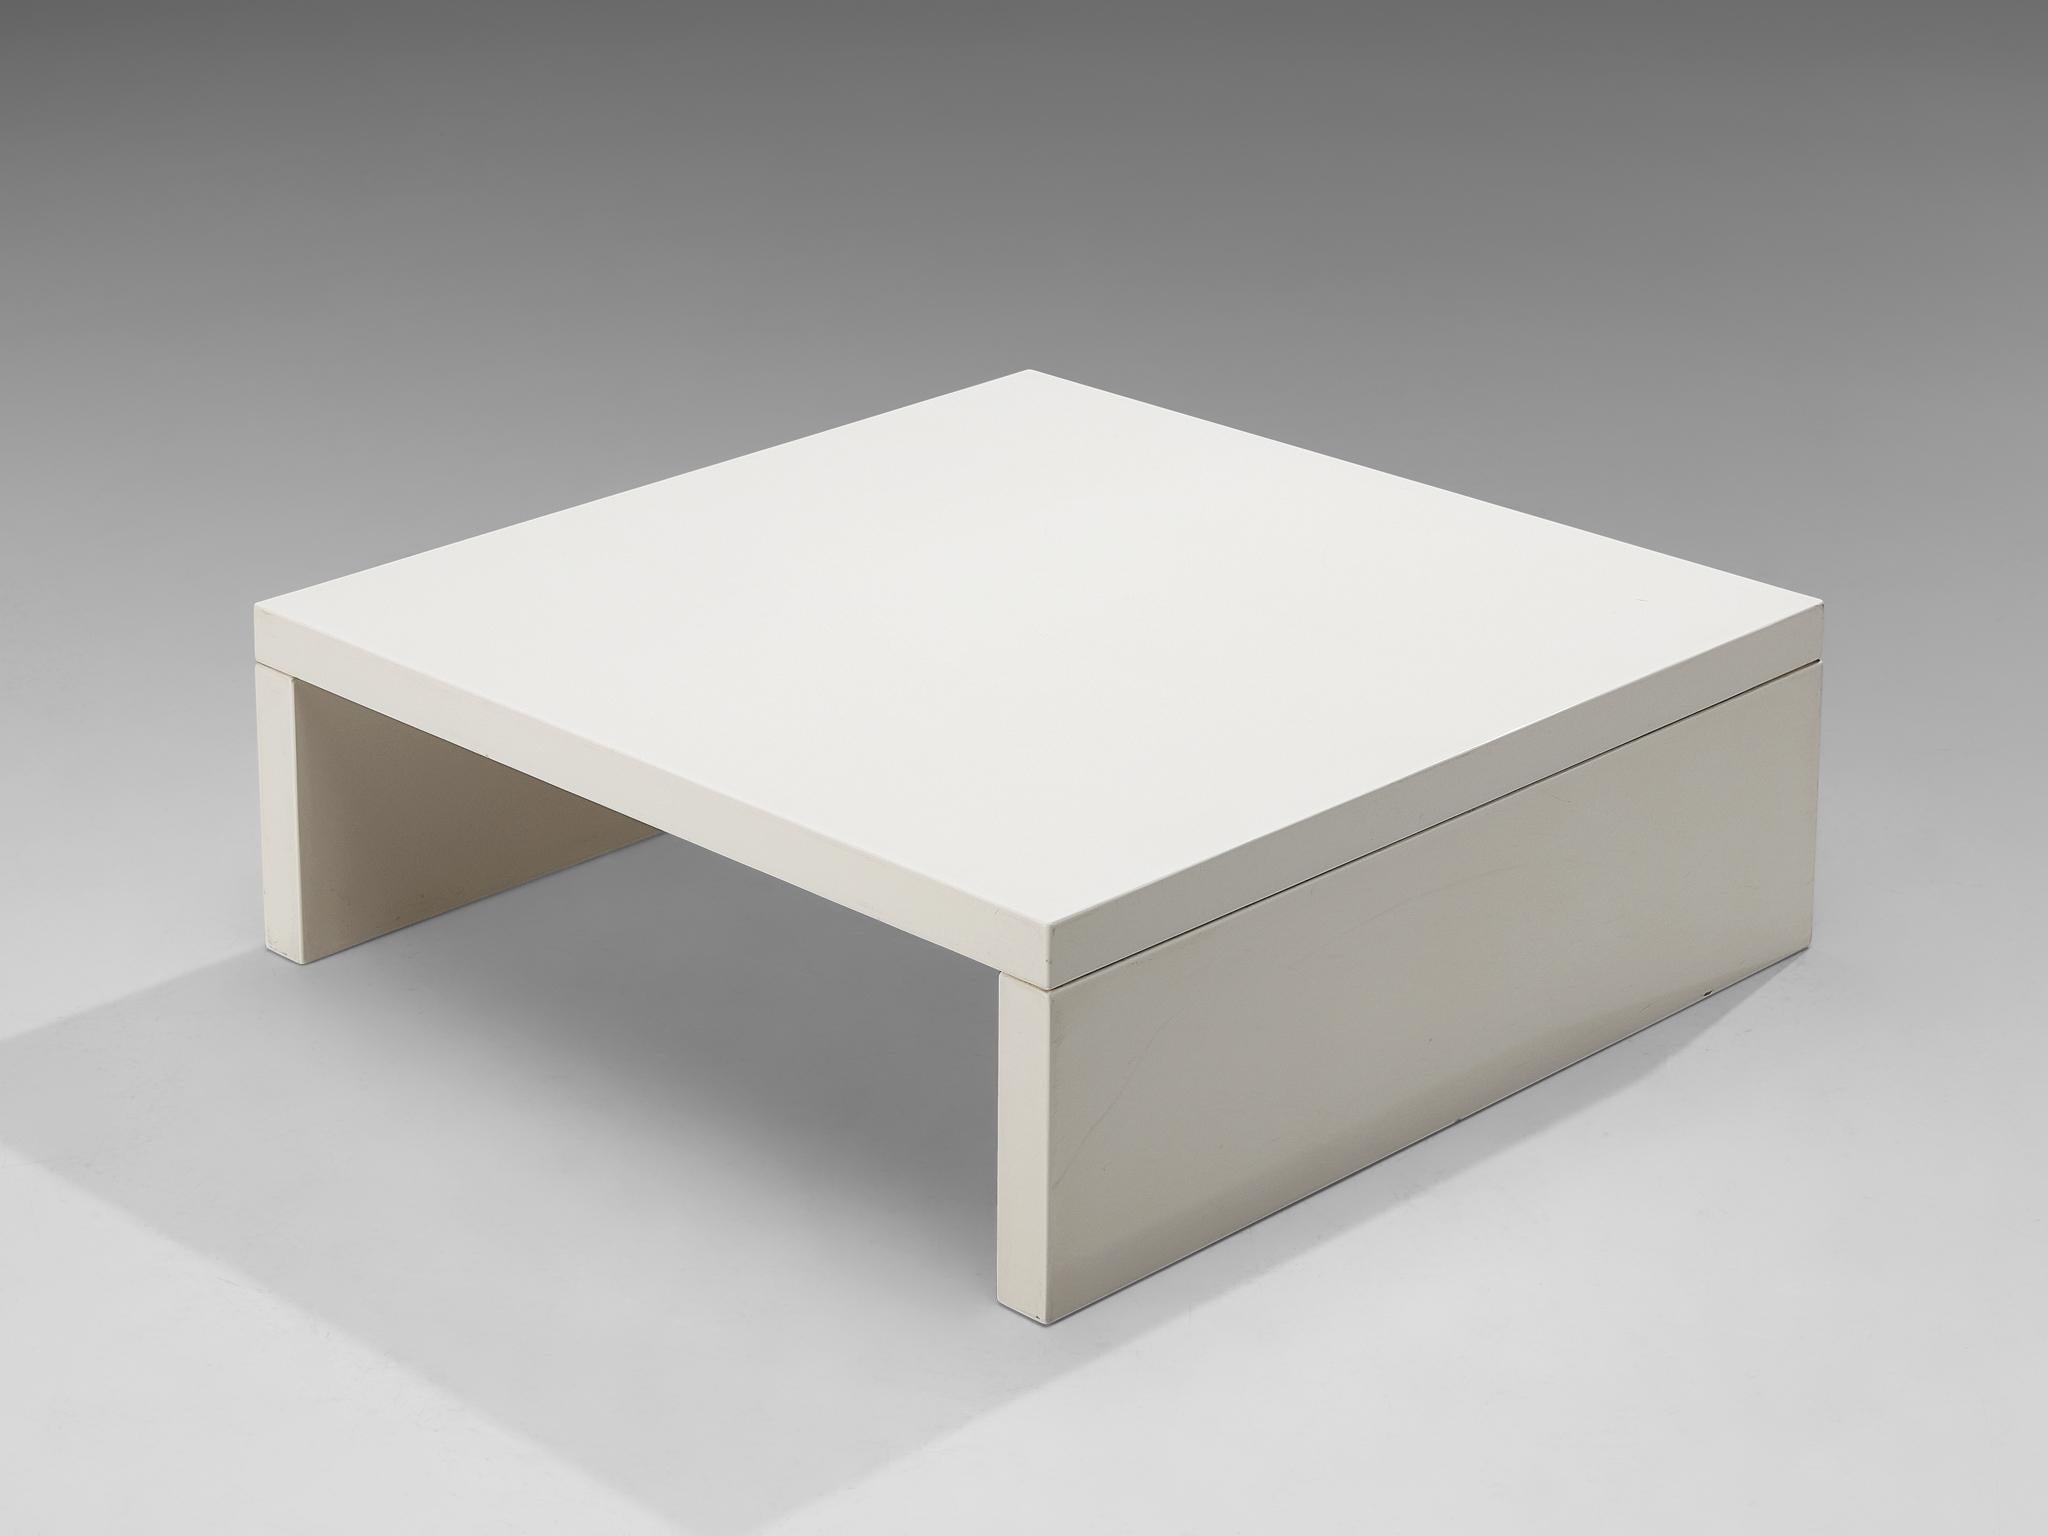 Coffee table, lacquered wood, Italy, 1970s

Clean and unobstructed coffee table executed in high-gloss white lacquered wood. It shows a closed sculptural frame underlining its purist design. This side table is a characteristic example of Italian